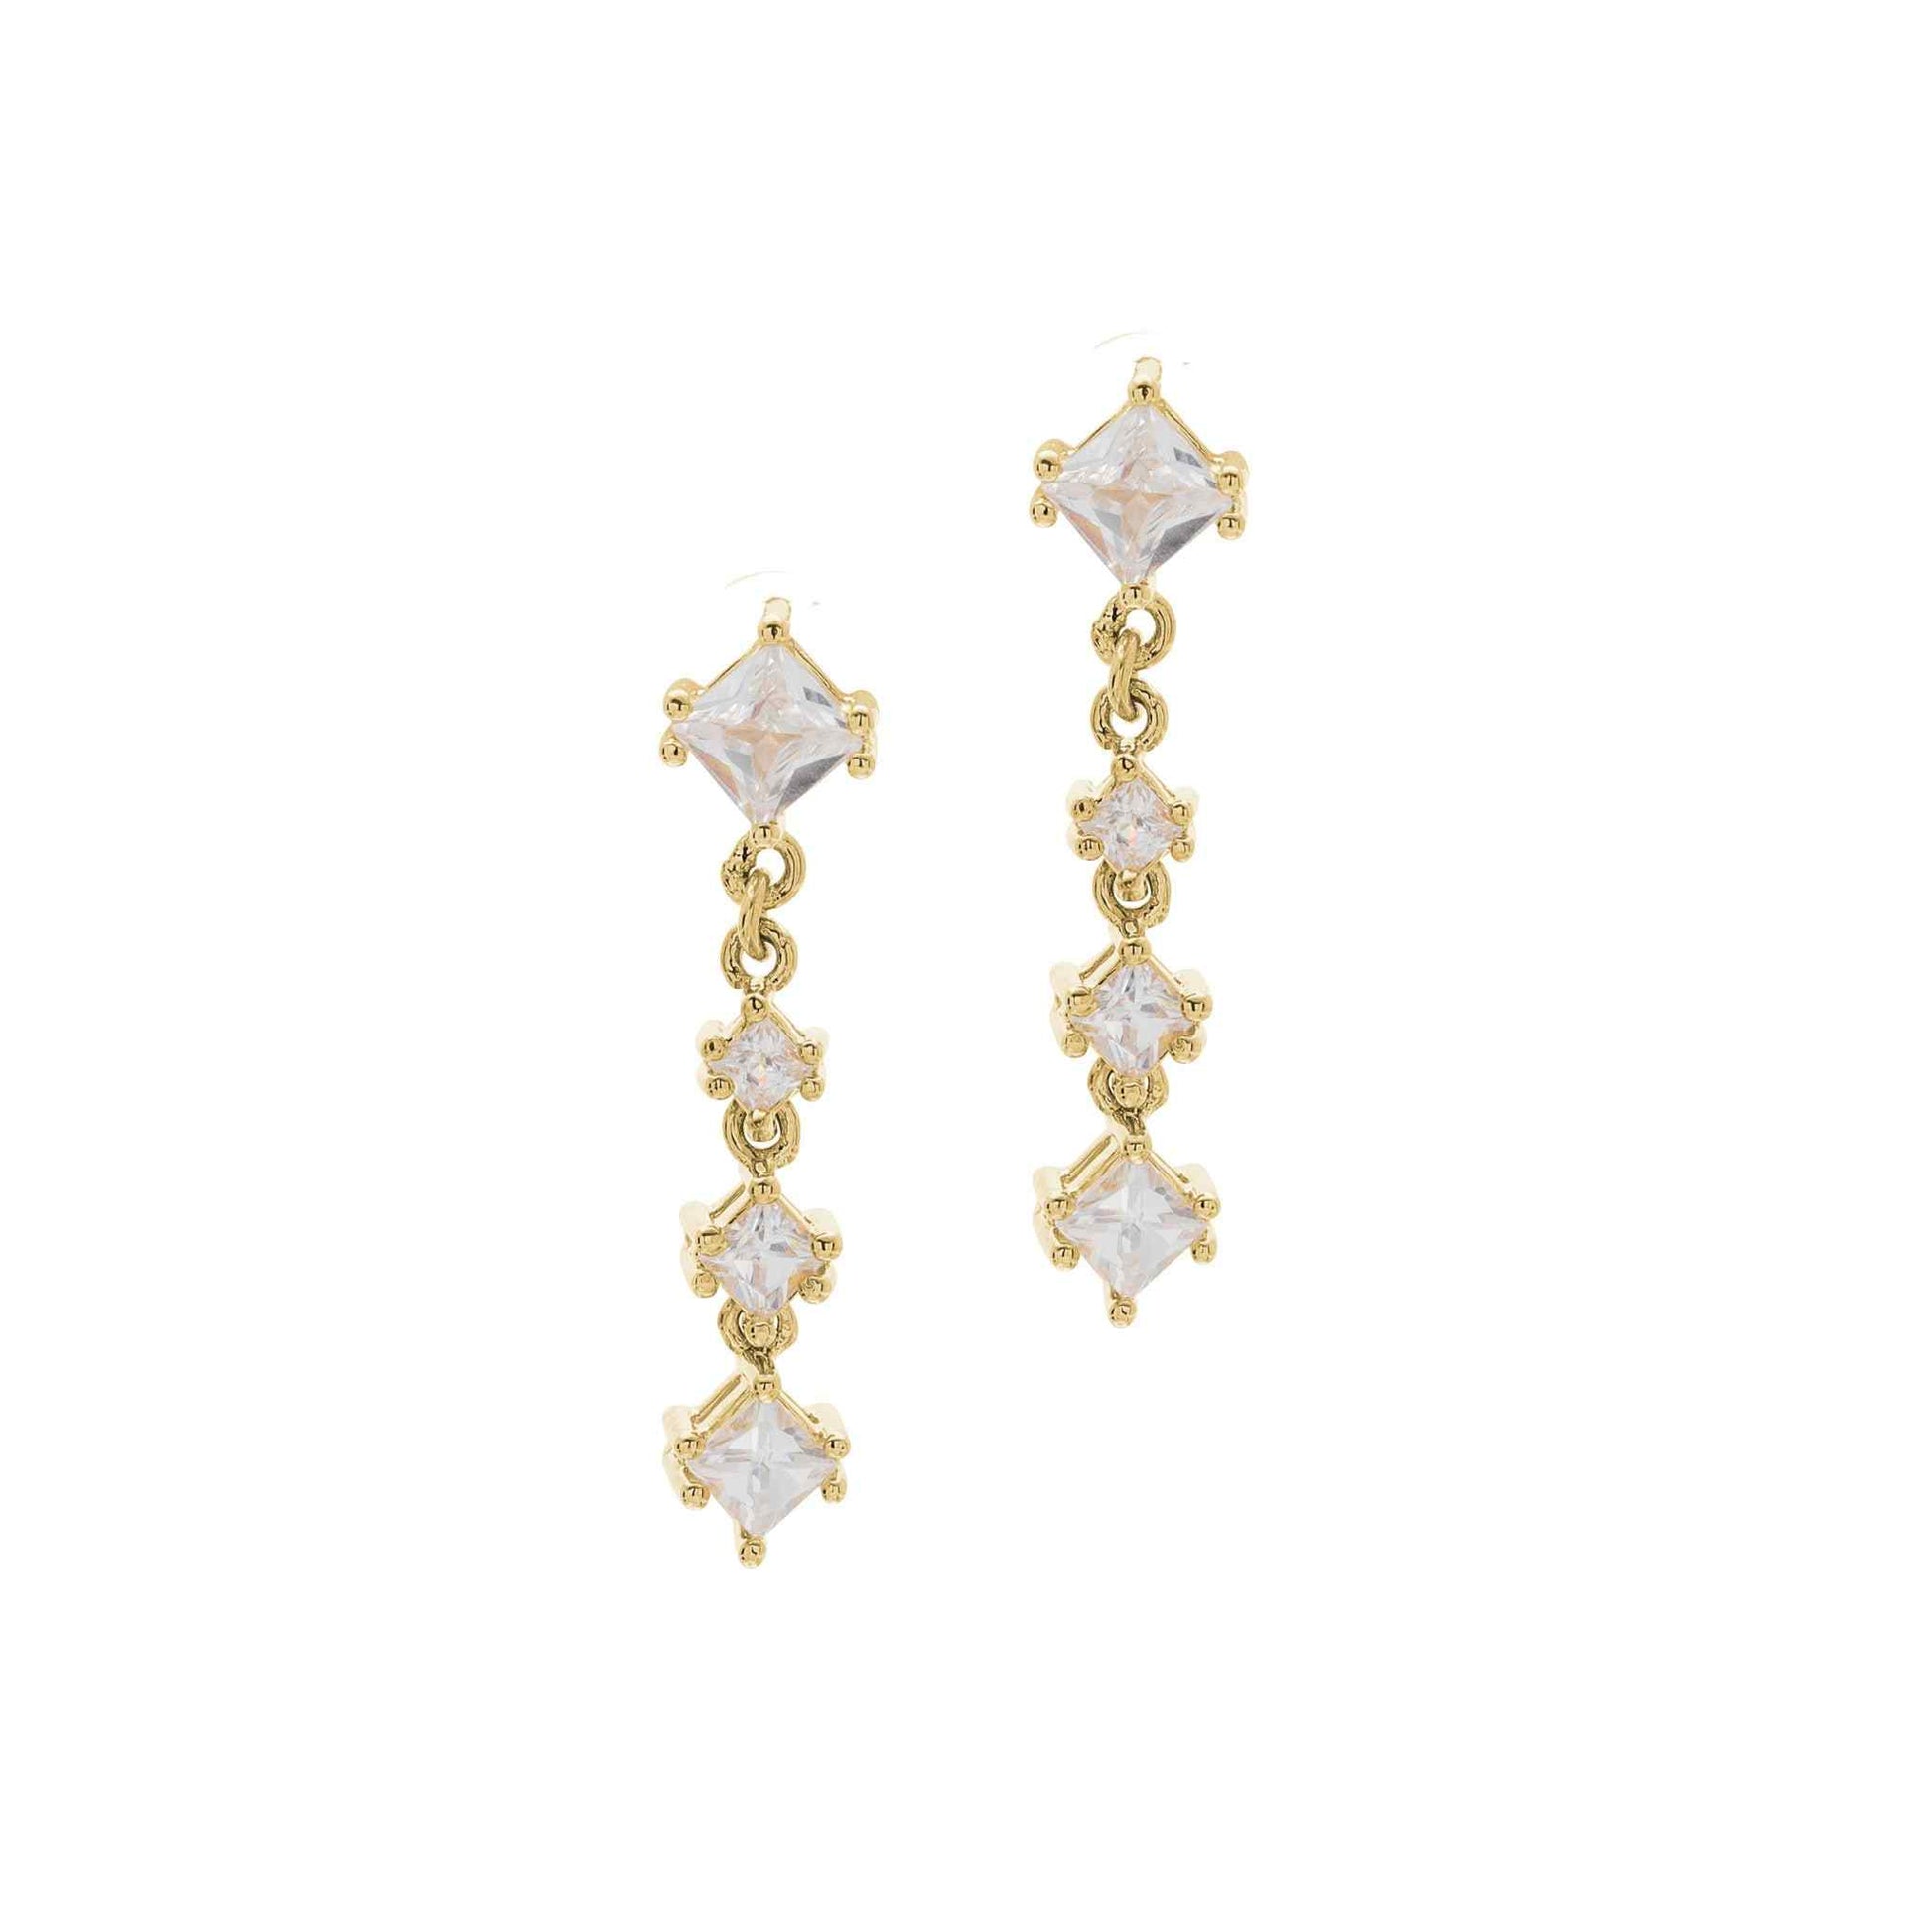 A princess cut simulated diamond drop earrings displayed on a neutral white background.